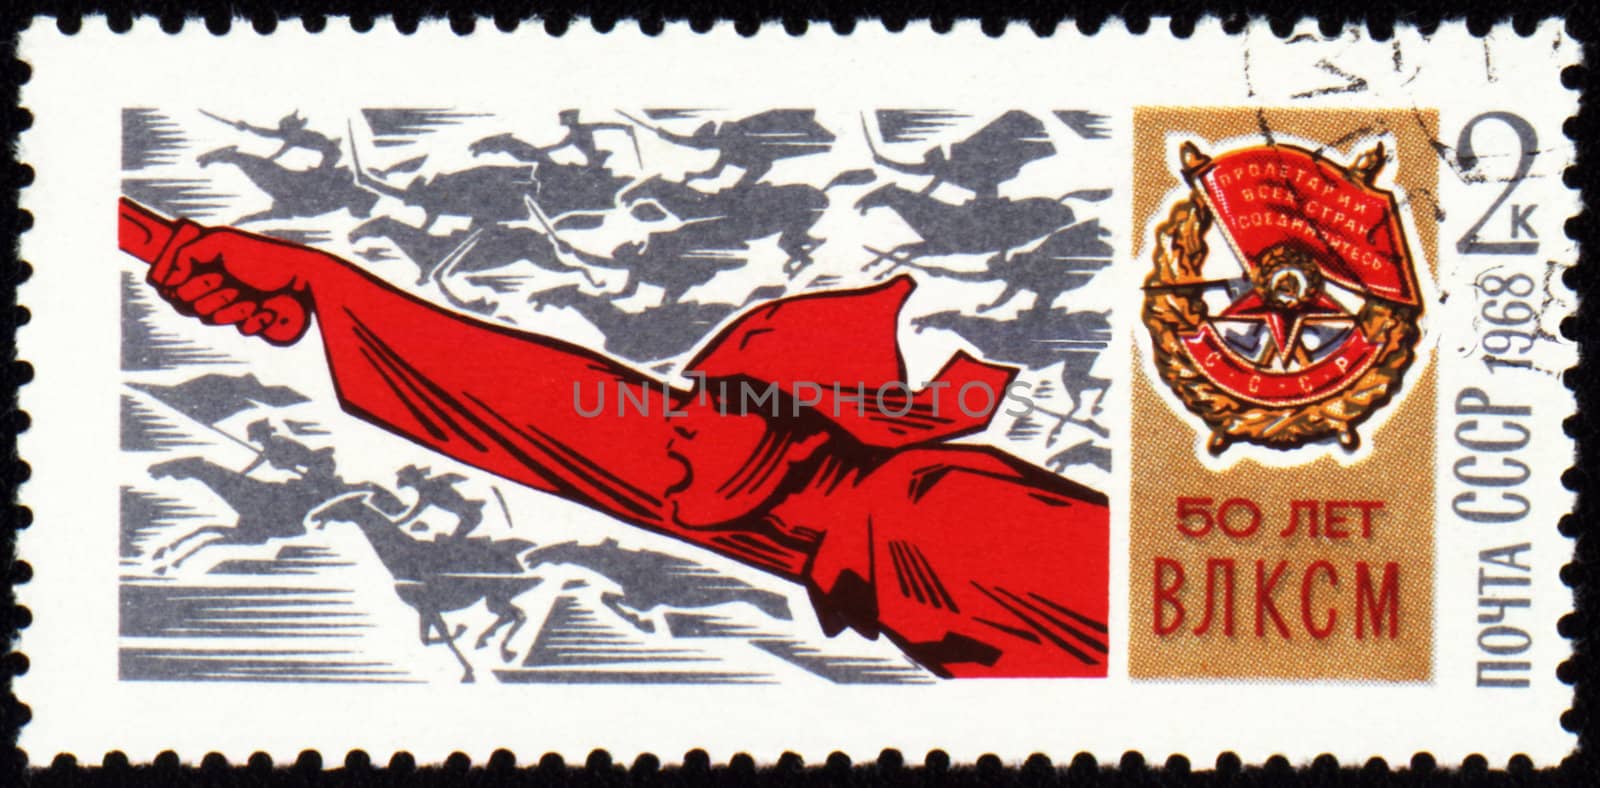 Red Army Man with a sword on postage stamp by wander